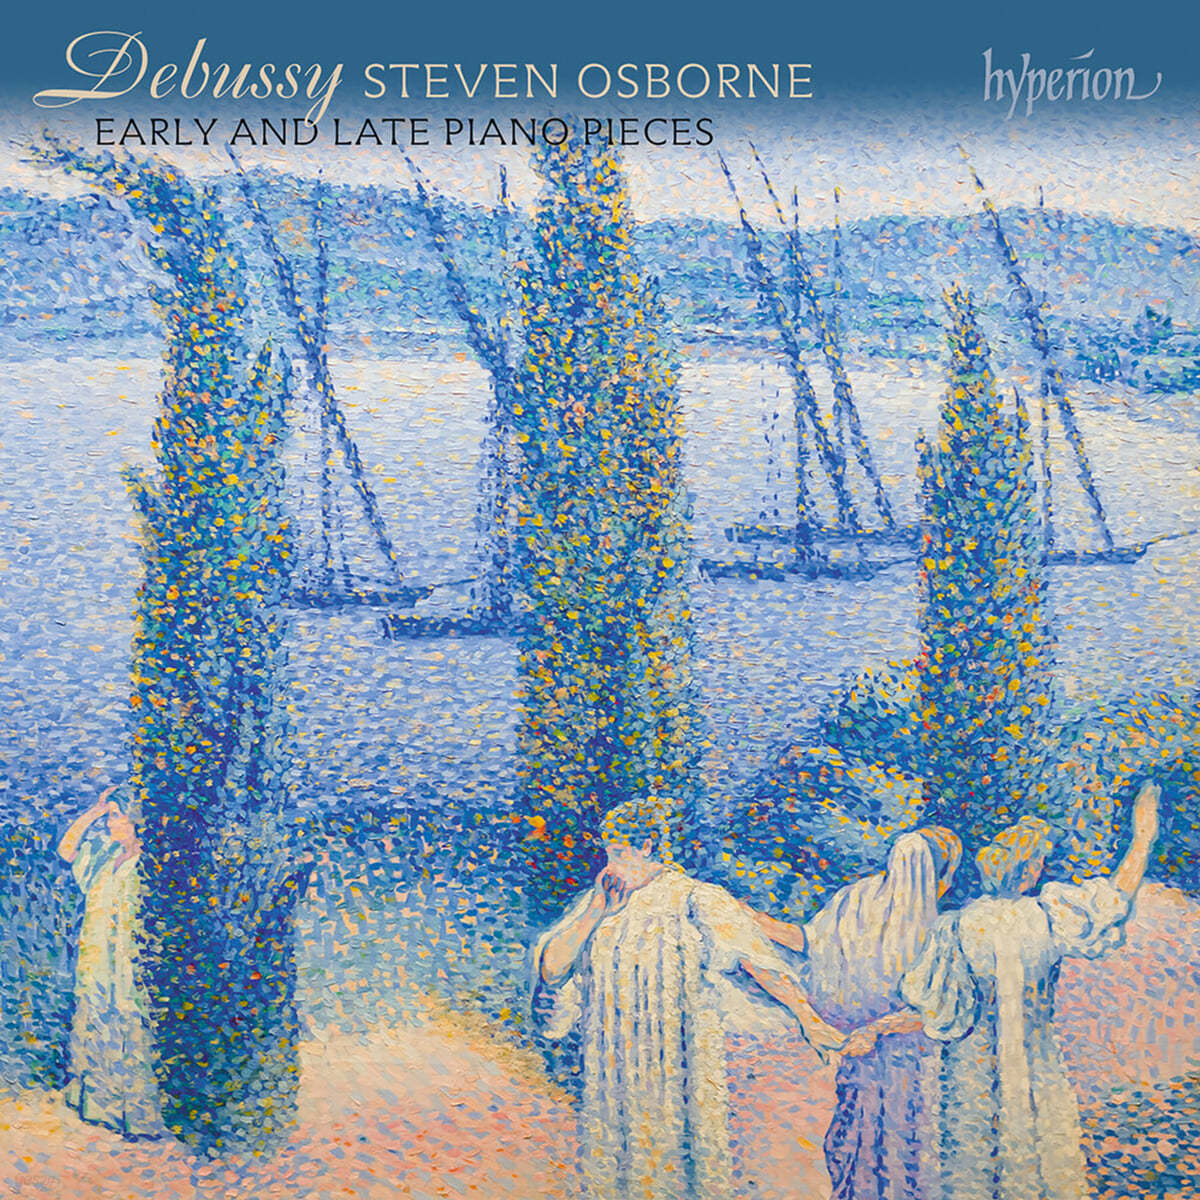 Steven Osborne 드뷔시: 초기와 후기 피아노 작품집 - 스티븐 오스본 (Debussy: Early and late piano pieces)